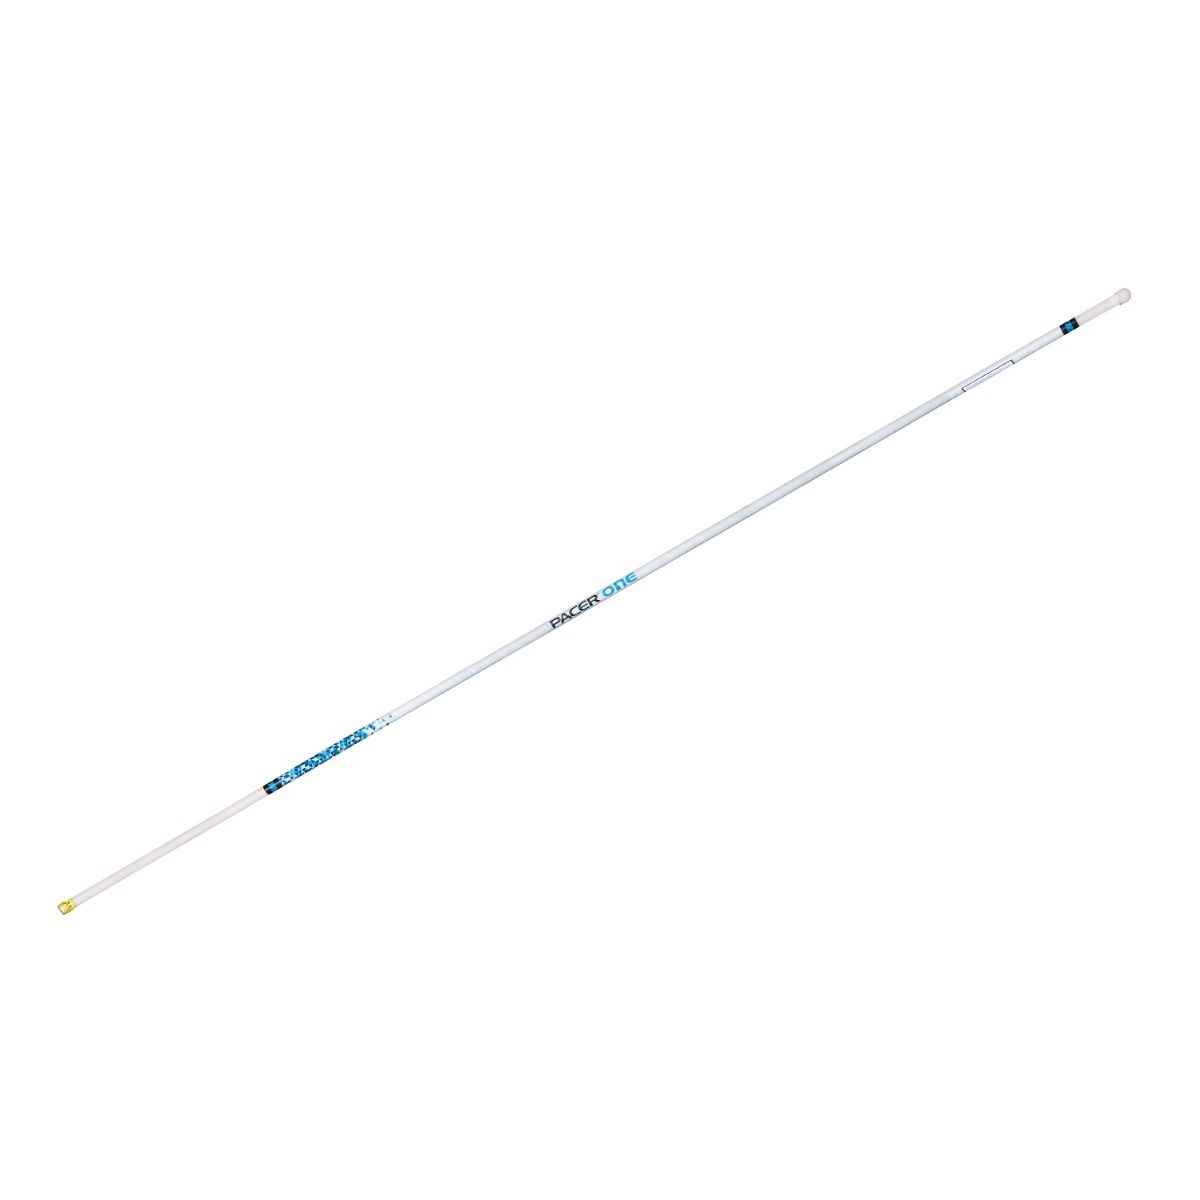 Gill 11' Pacer One Vaulting Pole